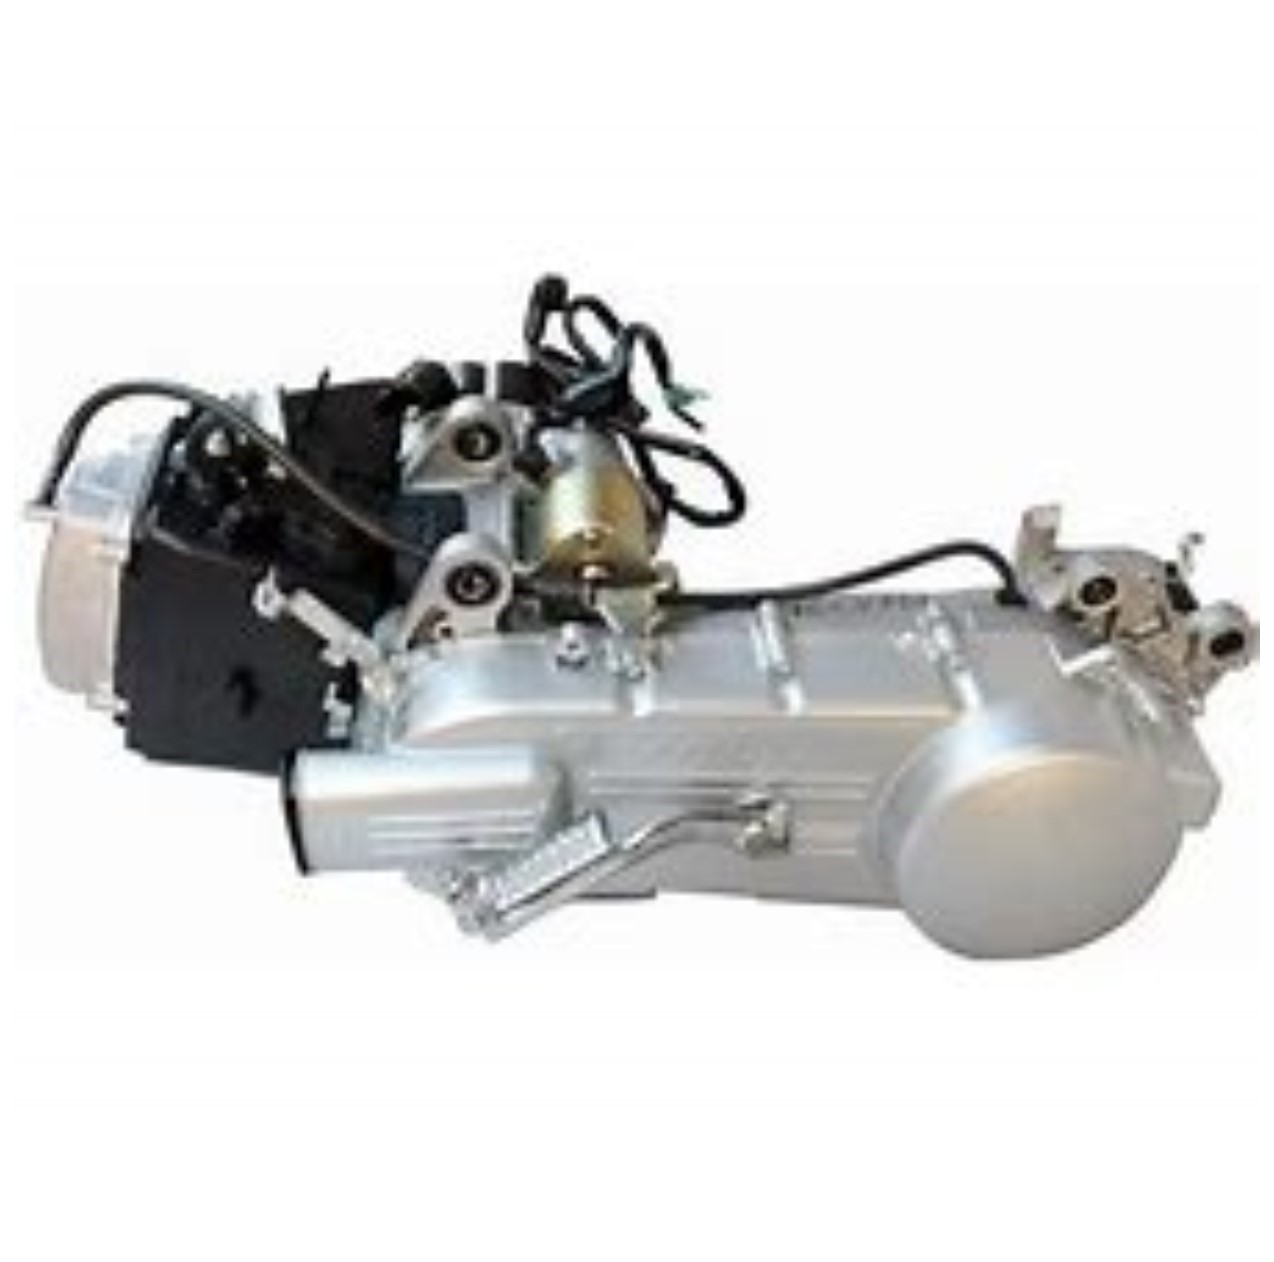 GY6- 125cc, 150cc, 180cc Parts Fit Most Chinese Scooters-ATVs-GoKarts